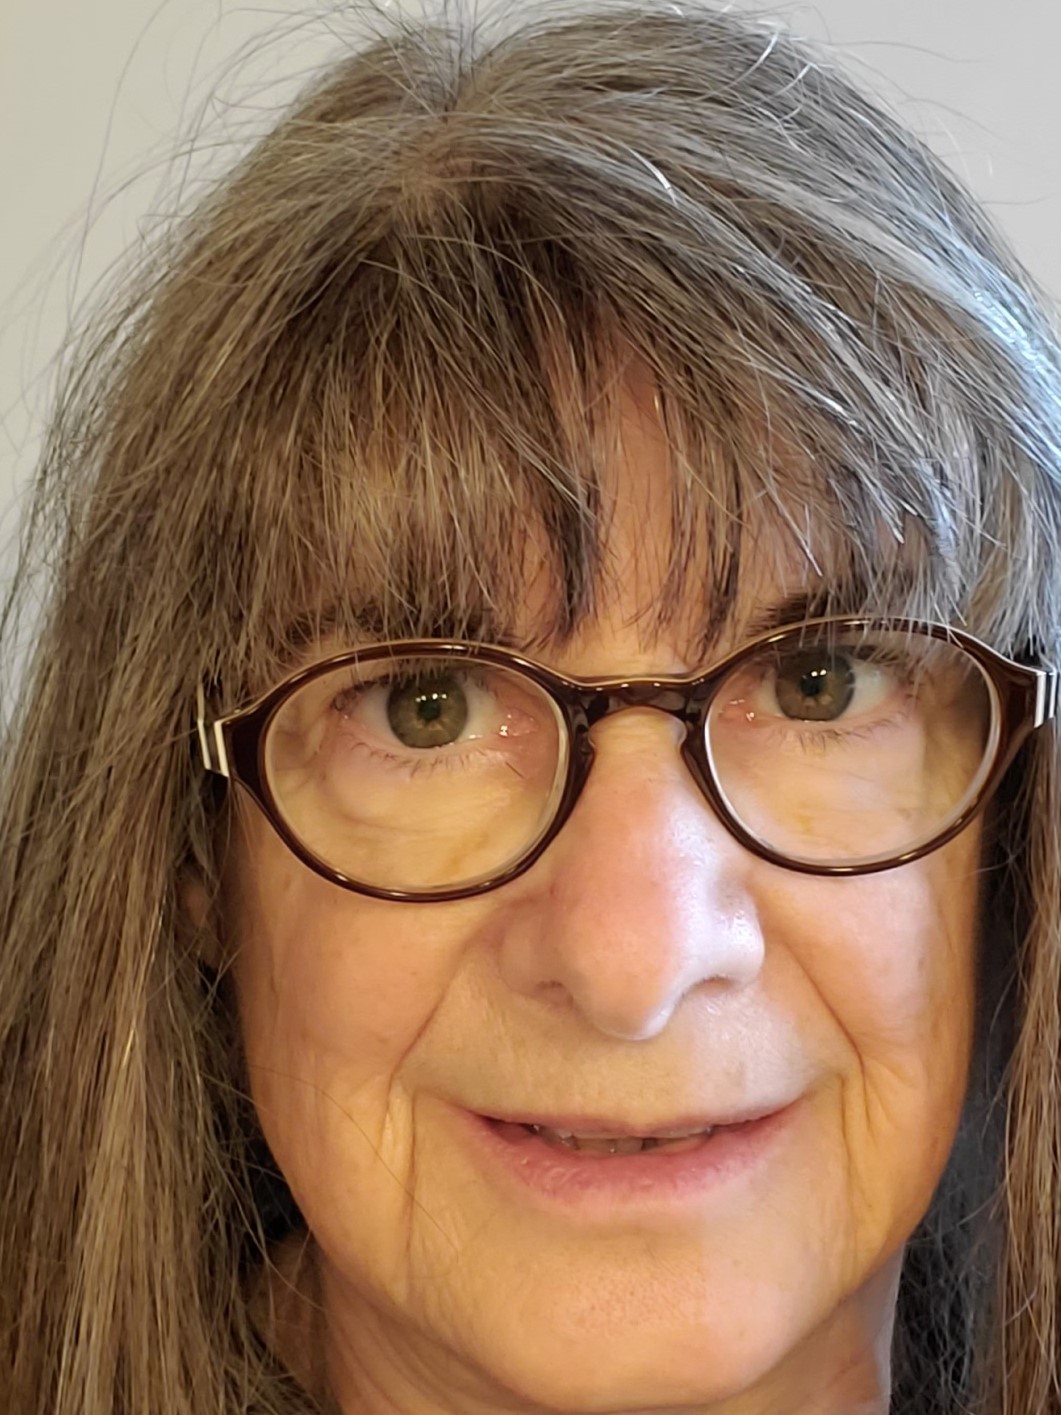 Laura Millberg Caucasian with brown/gray shoulder-length hair and bangs to eyebrows. Brown eyes and dark rimmed glasses. 